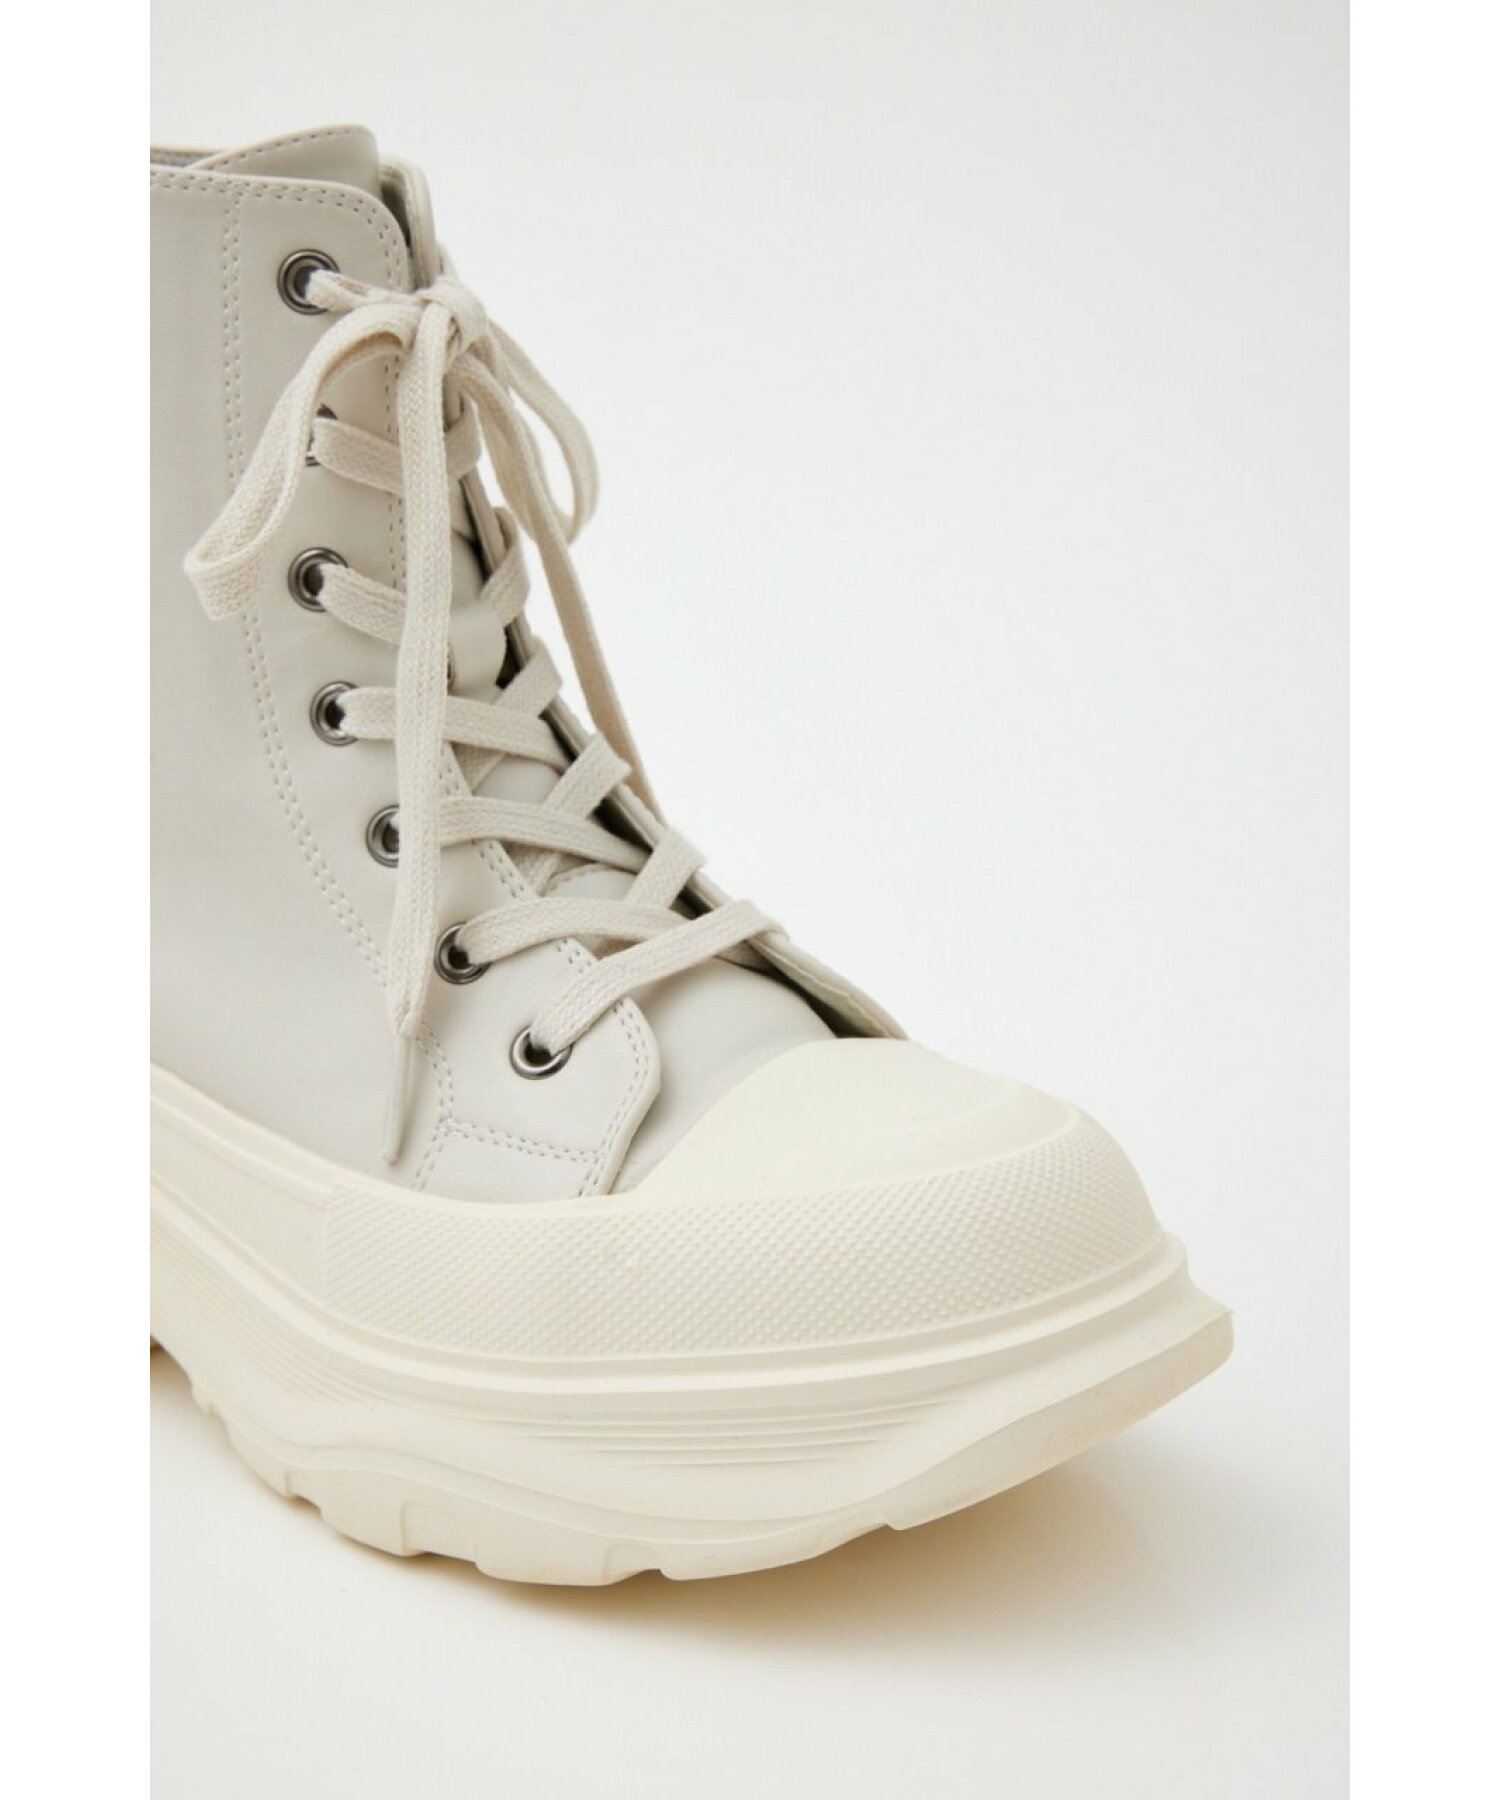 LACE UP SNEAKER BOOTS